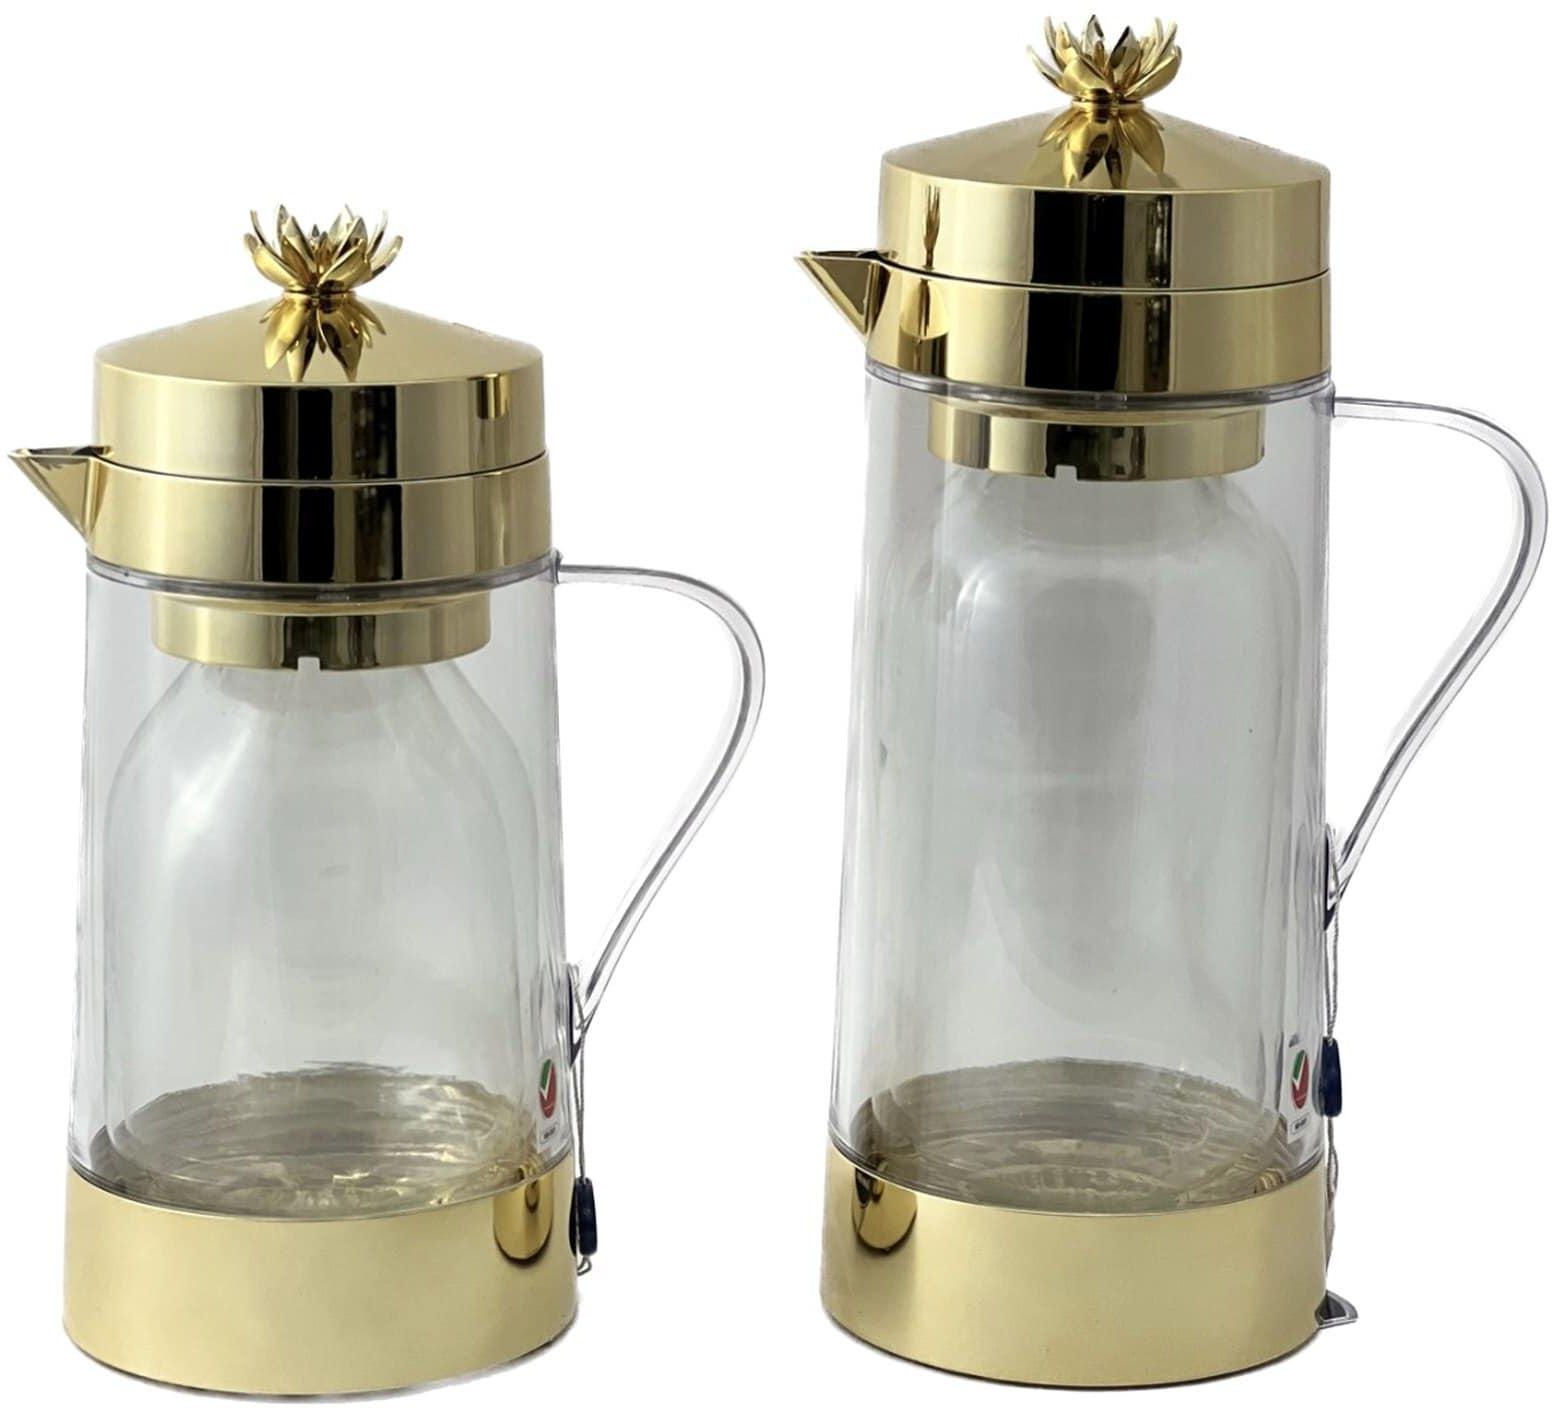 Home Maker Tea And Coffee Vacuum Flask Set Clear And Gold 1L+1.3L 2 PCS